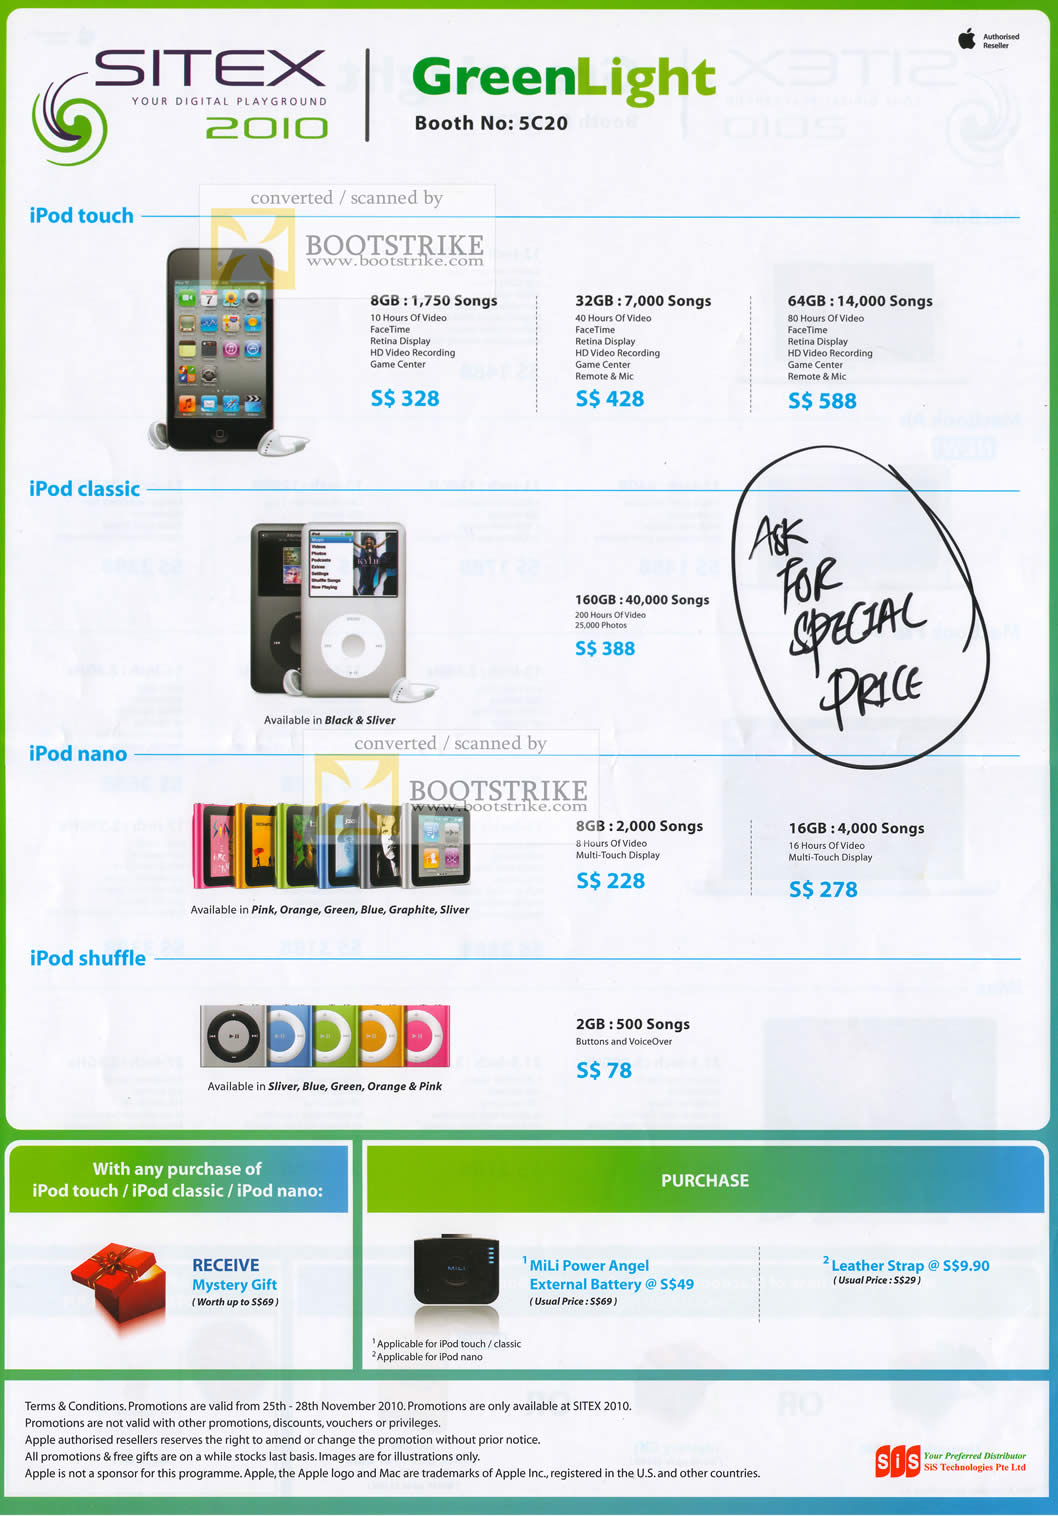 Sitex 2010 price list image brochure of Song Brothers Greenlight Apple IPod Touch Classic Nano Shuffle Mili Power Angel Battery